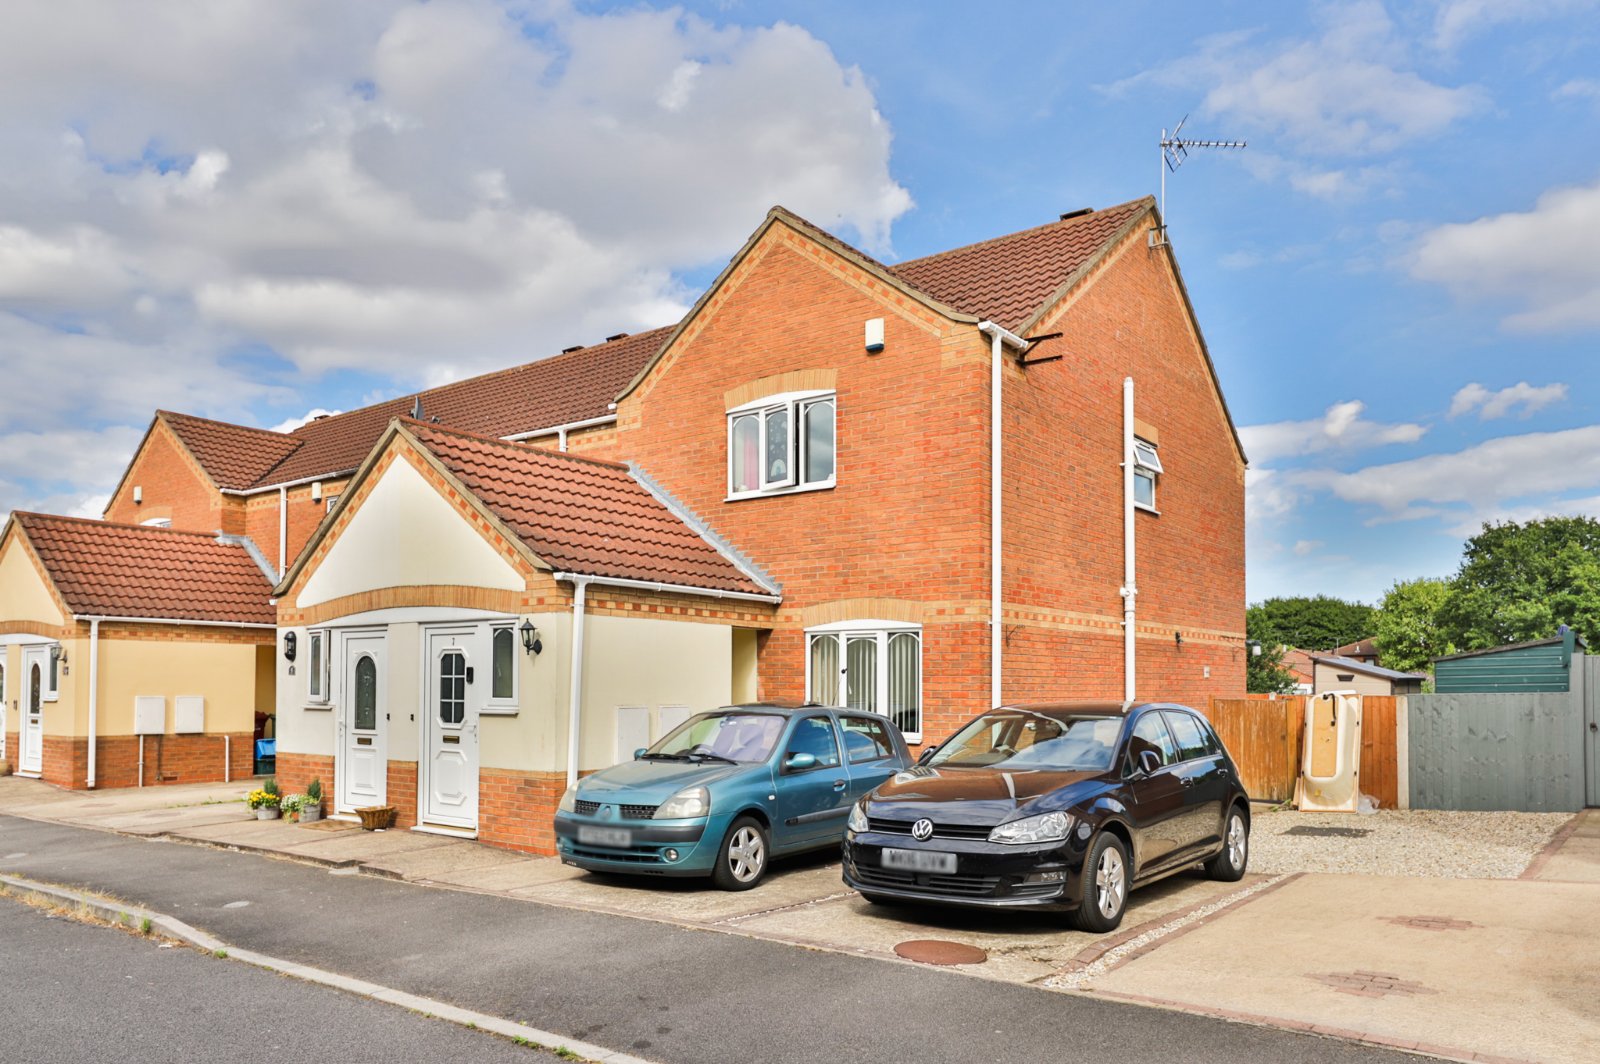 2 bed house for sale in Vagarth Close, Barton-upon-Humber, DN18